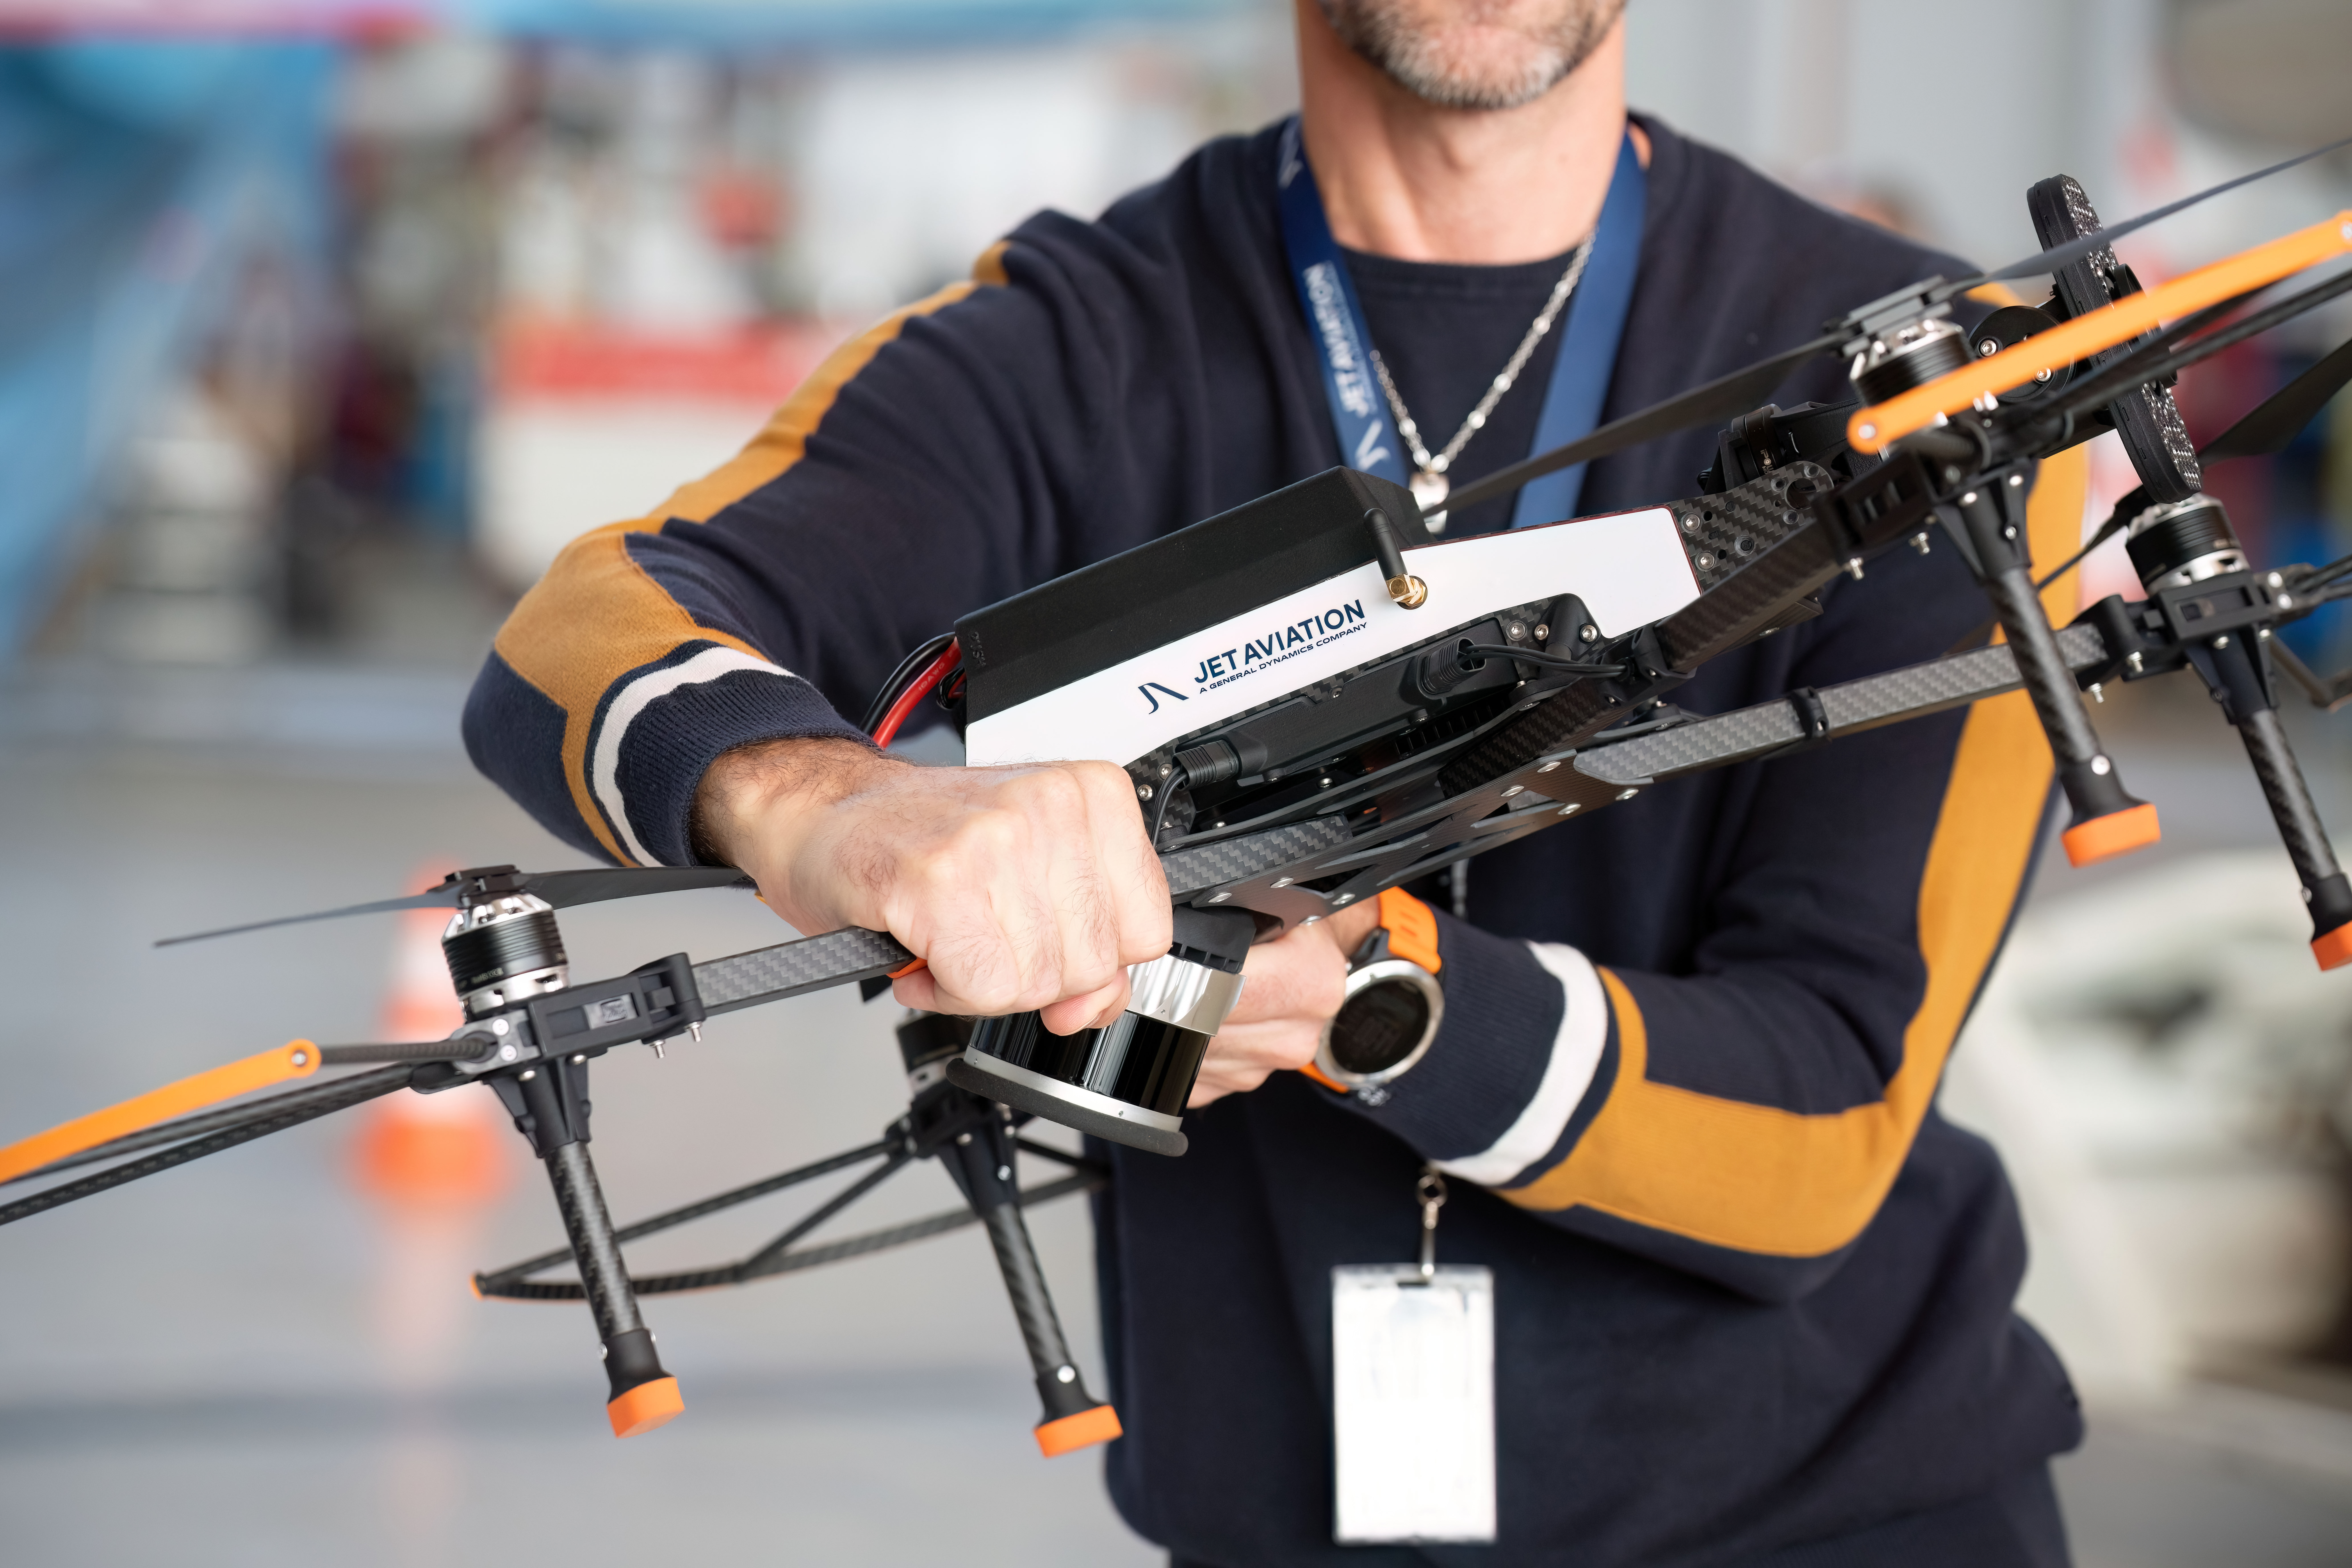 Automated drone for aircraft inspections